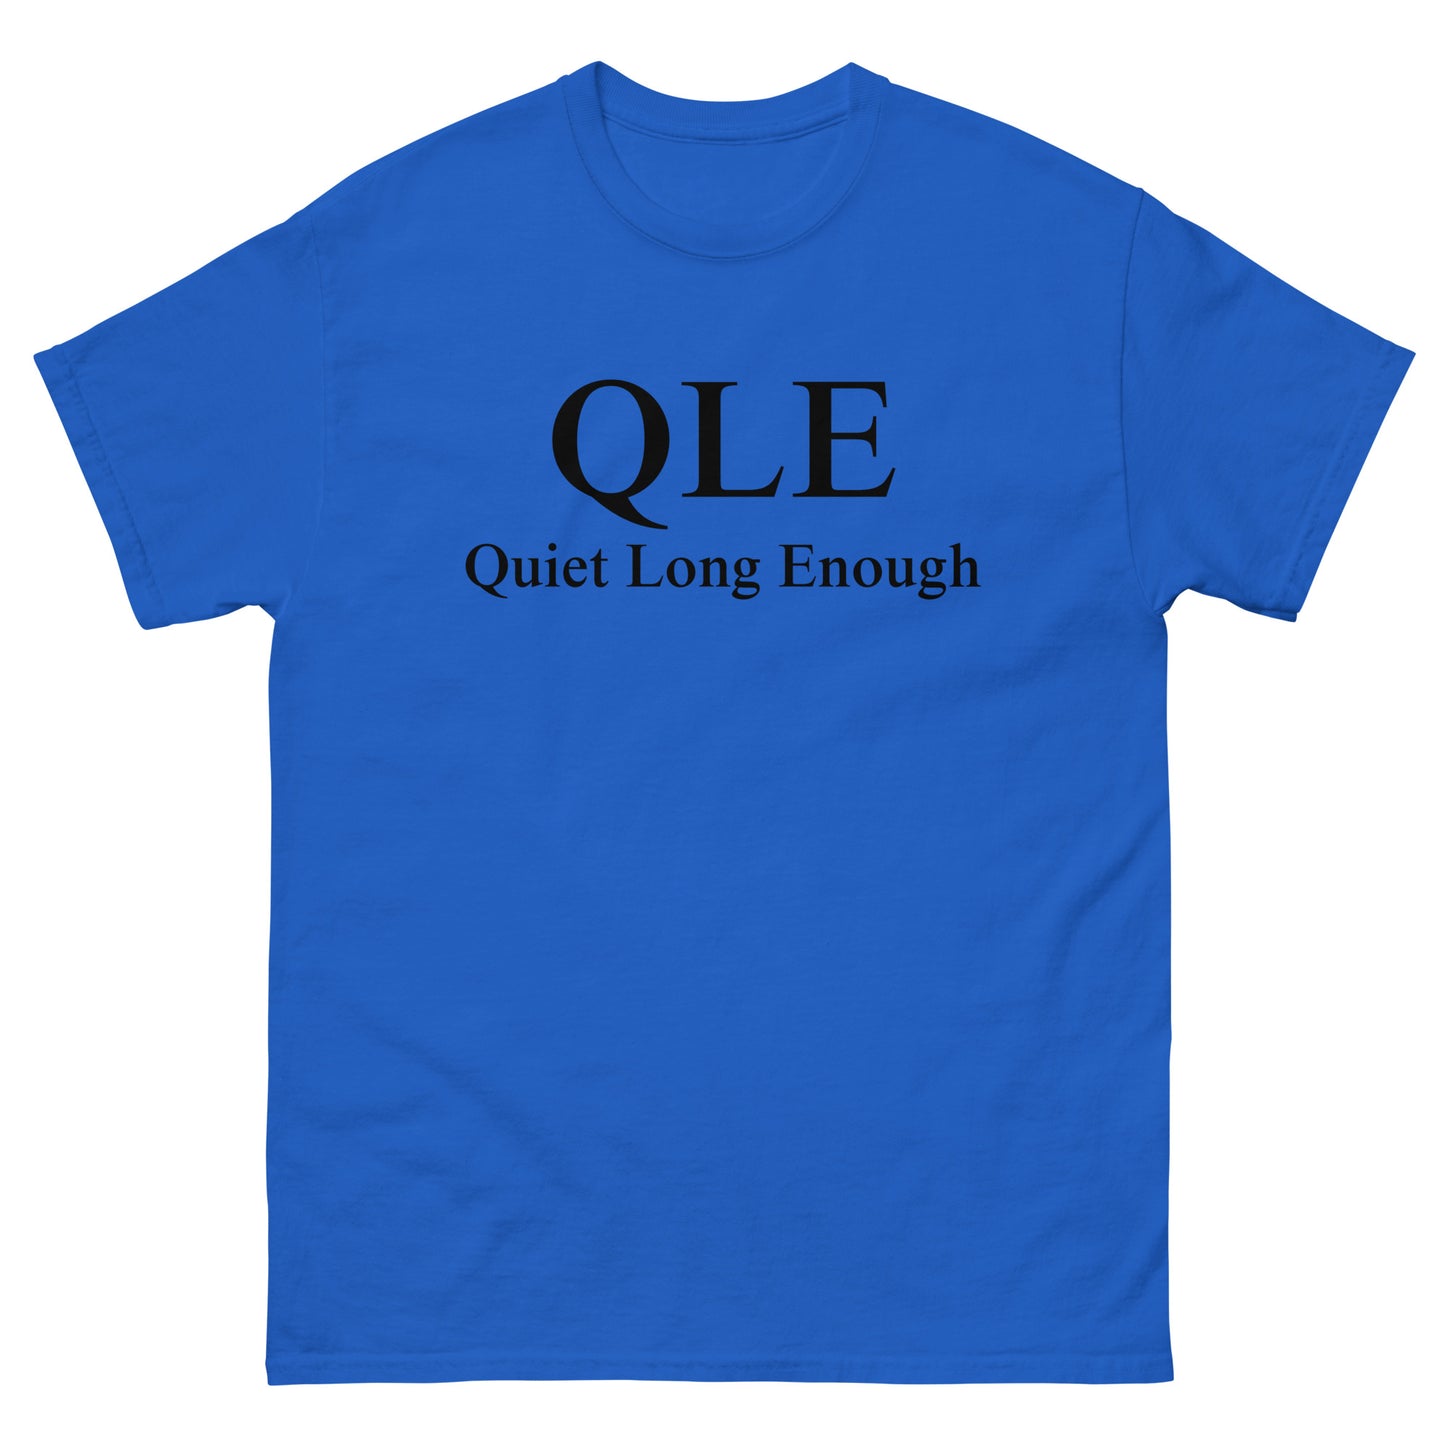 QLE Tee - Don't Gripe About It